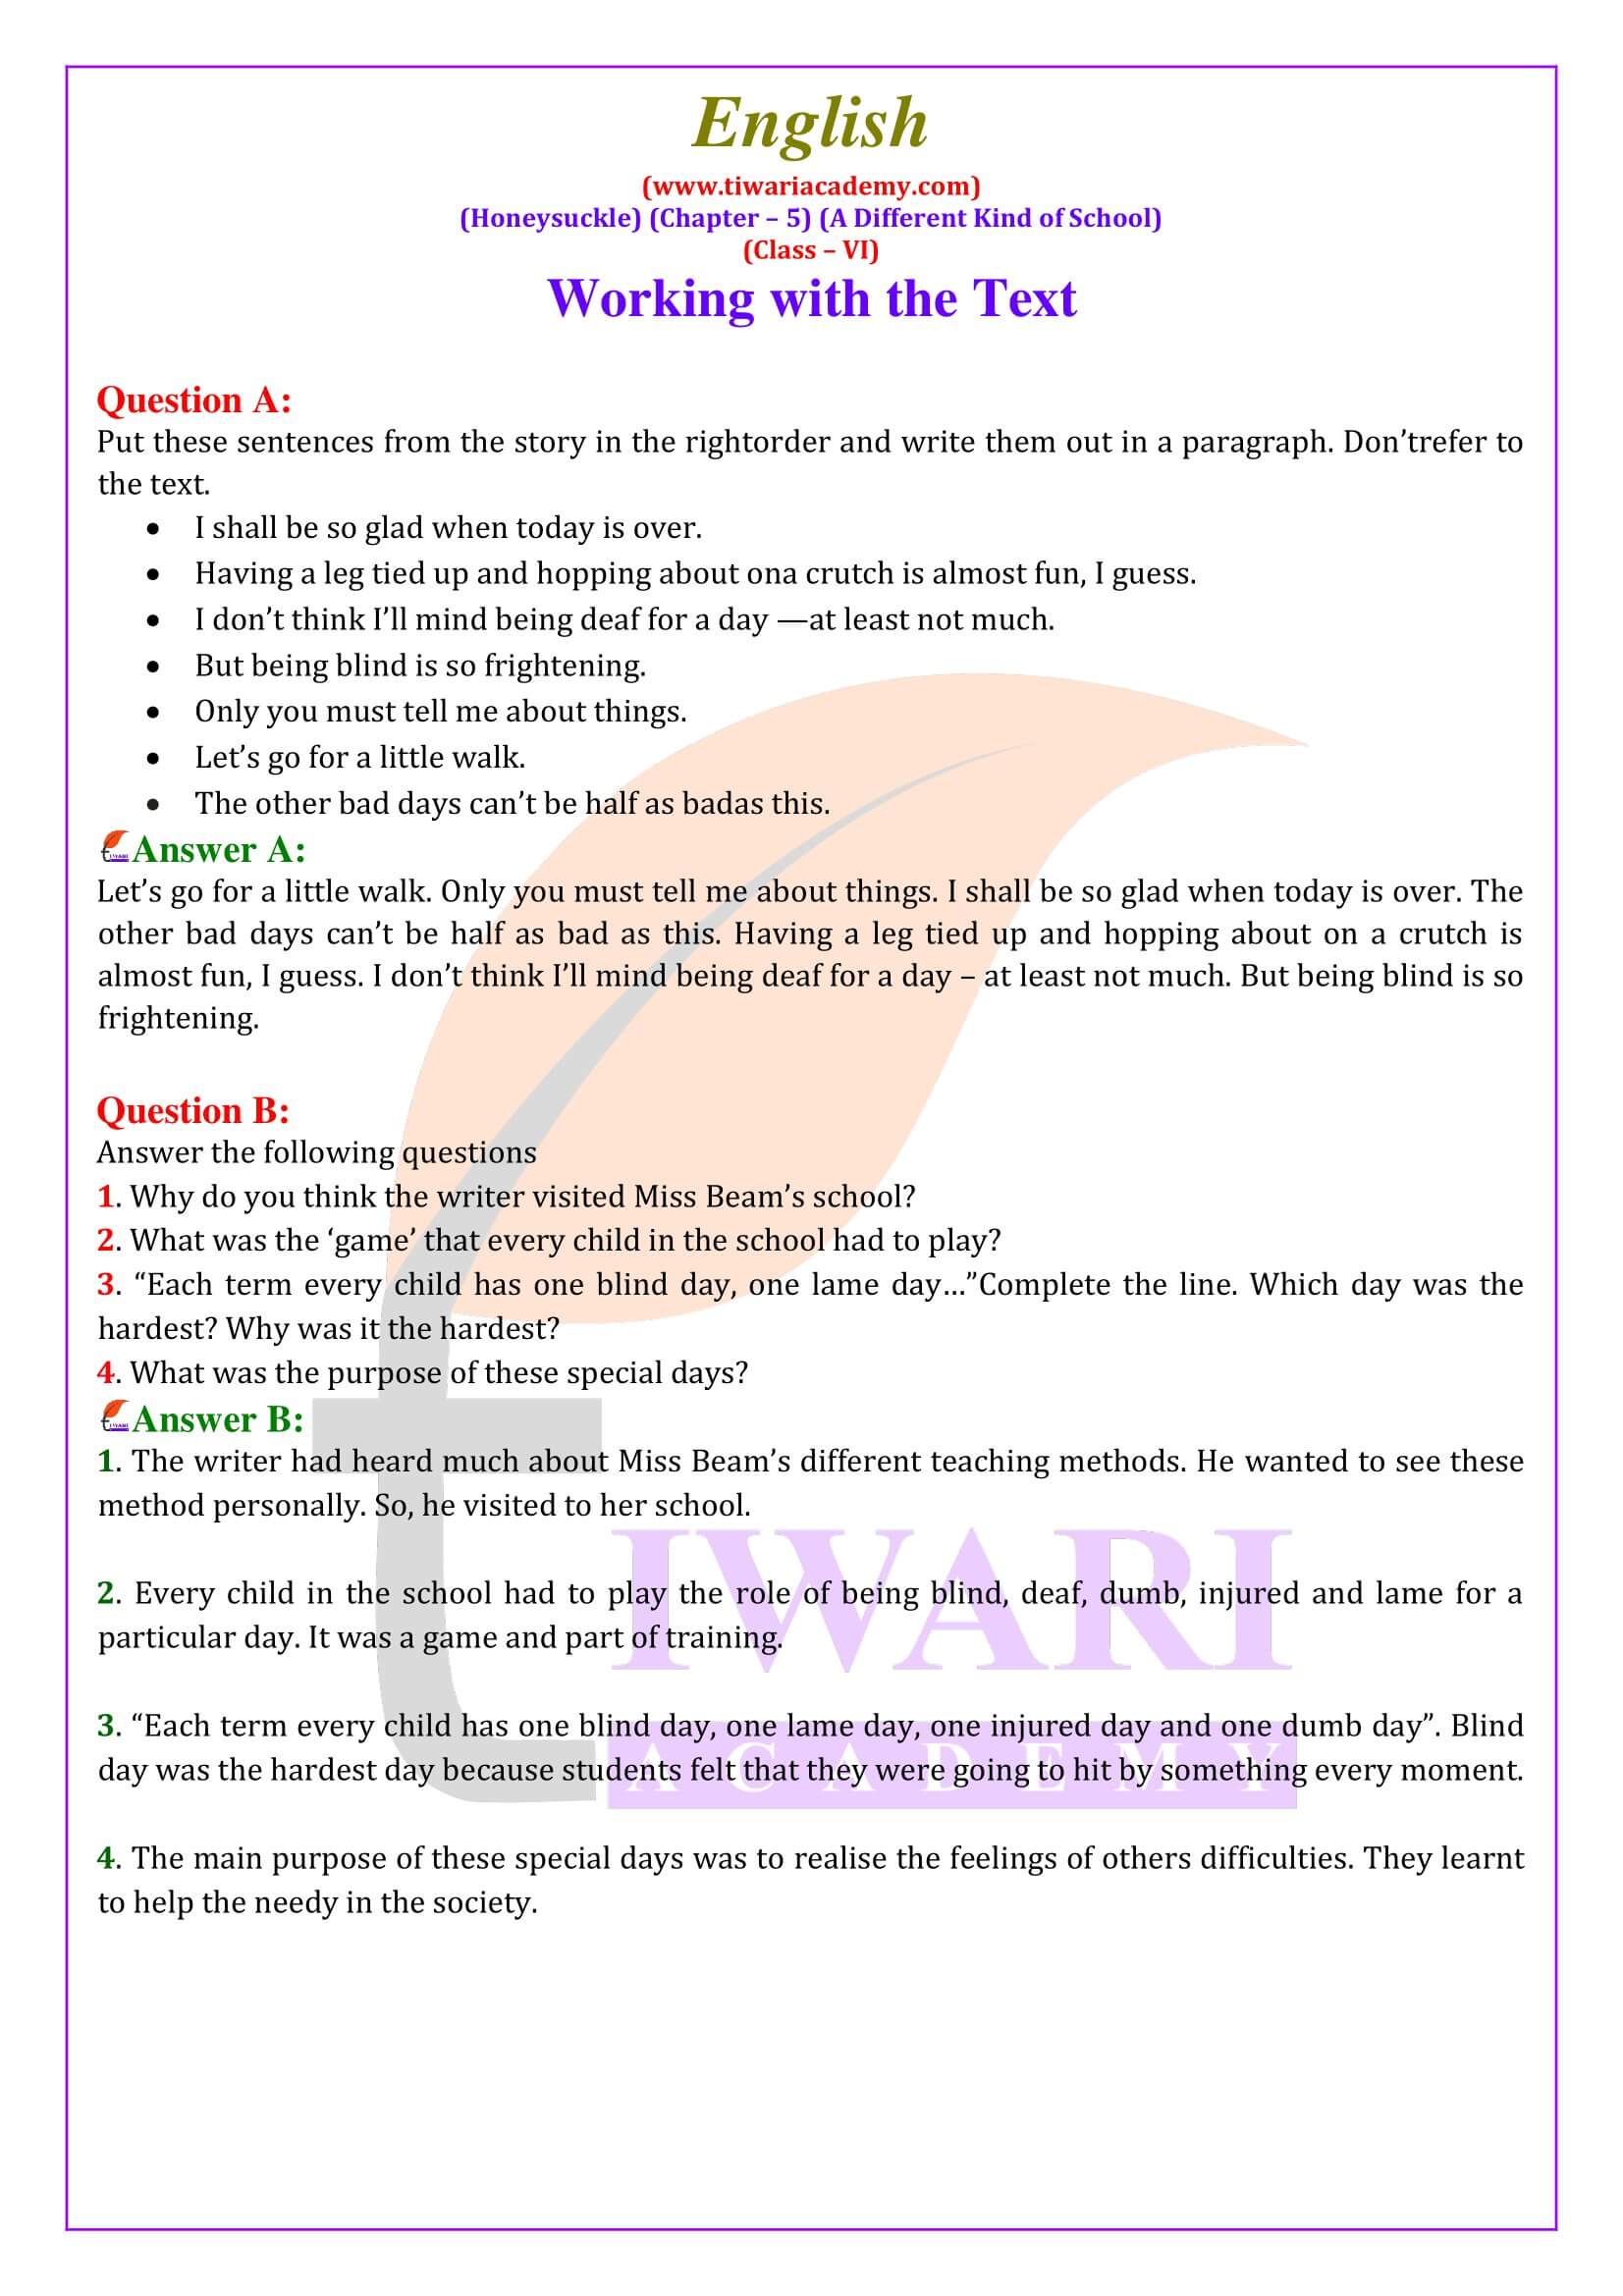 NCERT Solutions for Class 6 English Honeysuckle Chapter 5 A Different Kind of School